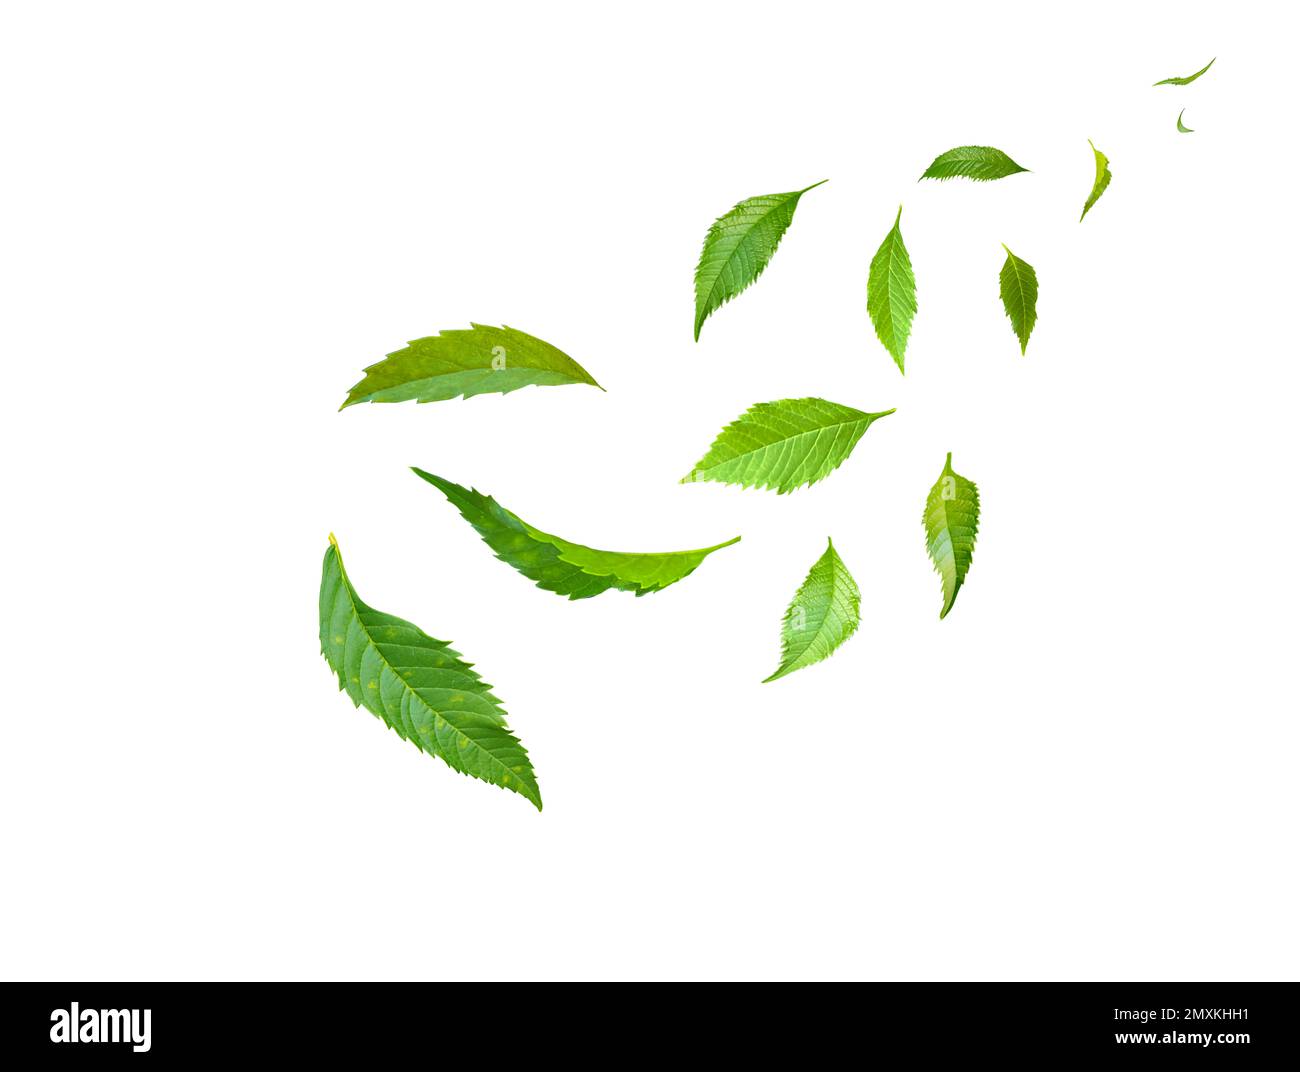 Green Floating Leaves Flying Leaves Green Leaf Dancing, Air Purifier Atmosphere Simple Main Picture Stock Photo